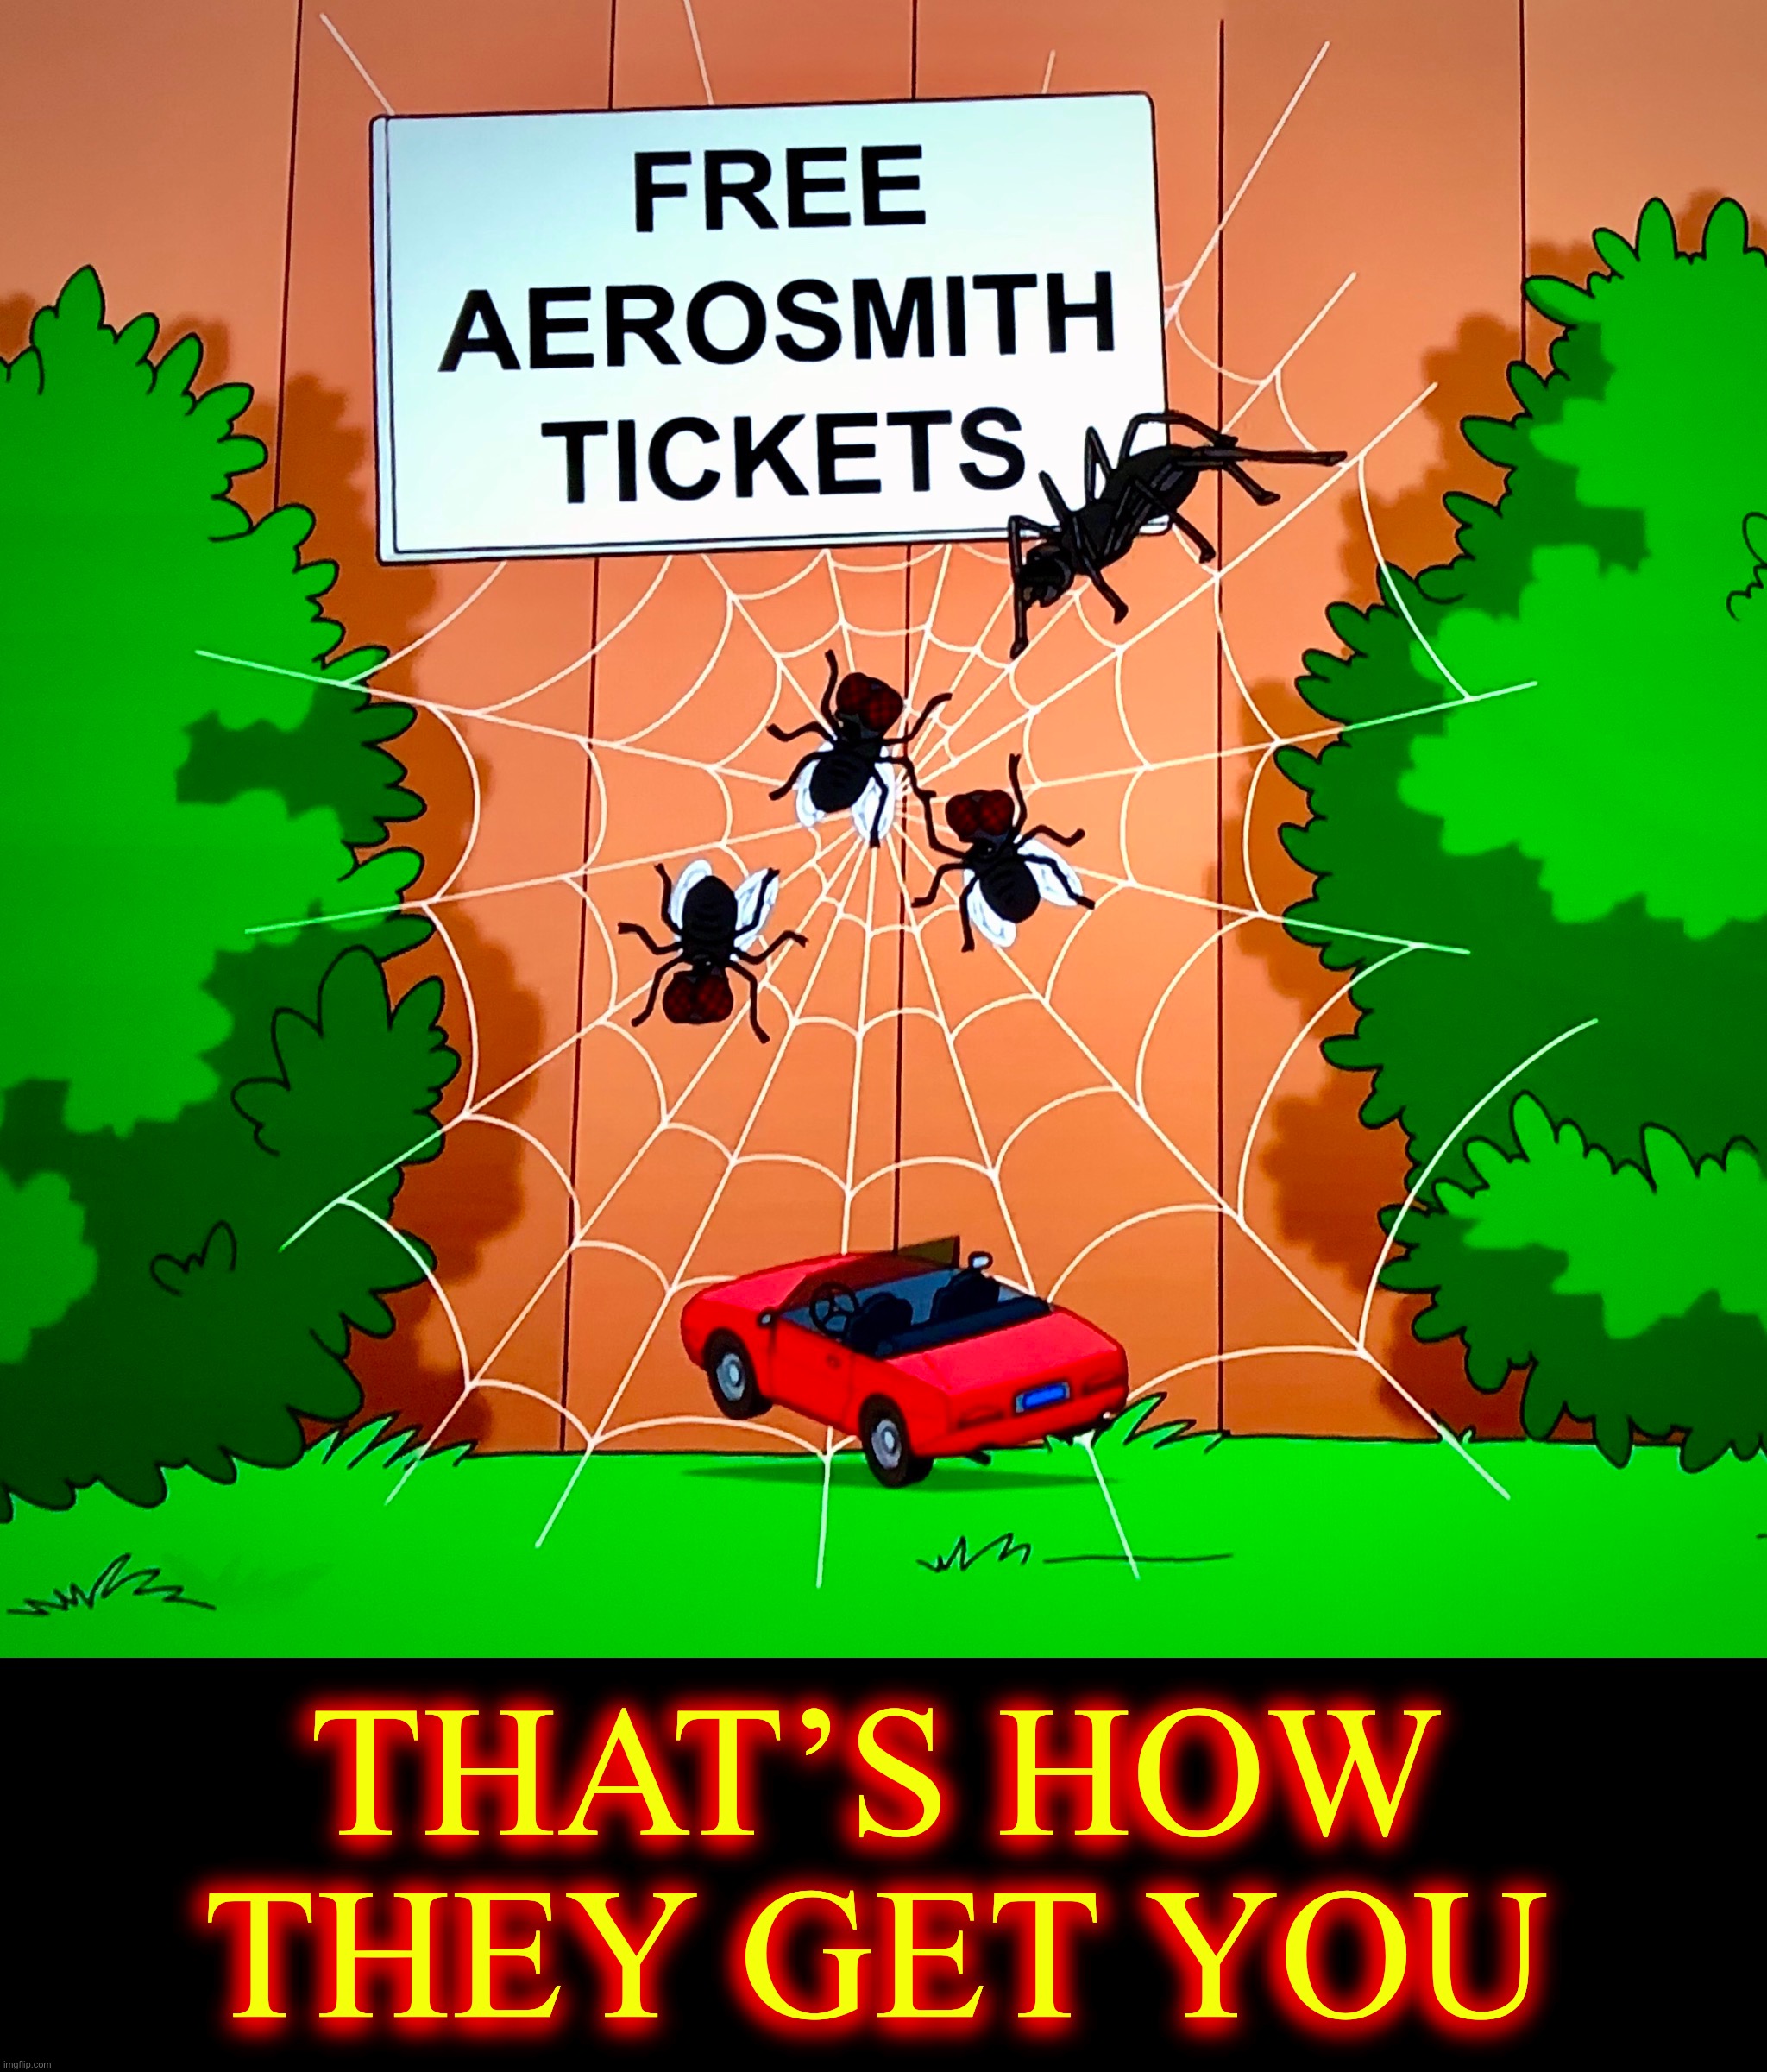 Spiders are Smart | THAT’S HOW THEY GET YOU | image tagged in spiders,flies,memes,cartoon,funny,aerosmith | made w/ Imgflip meme maker